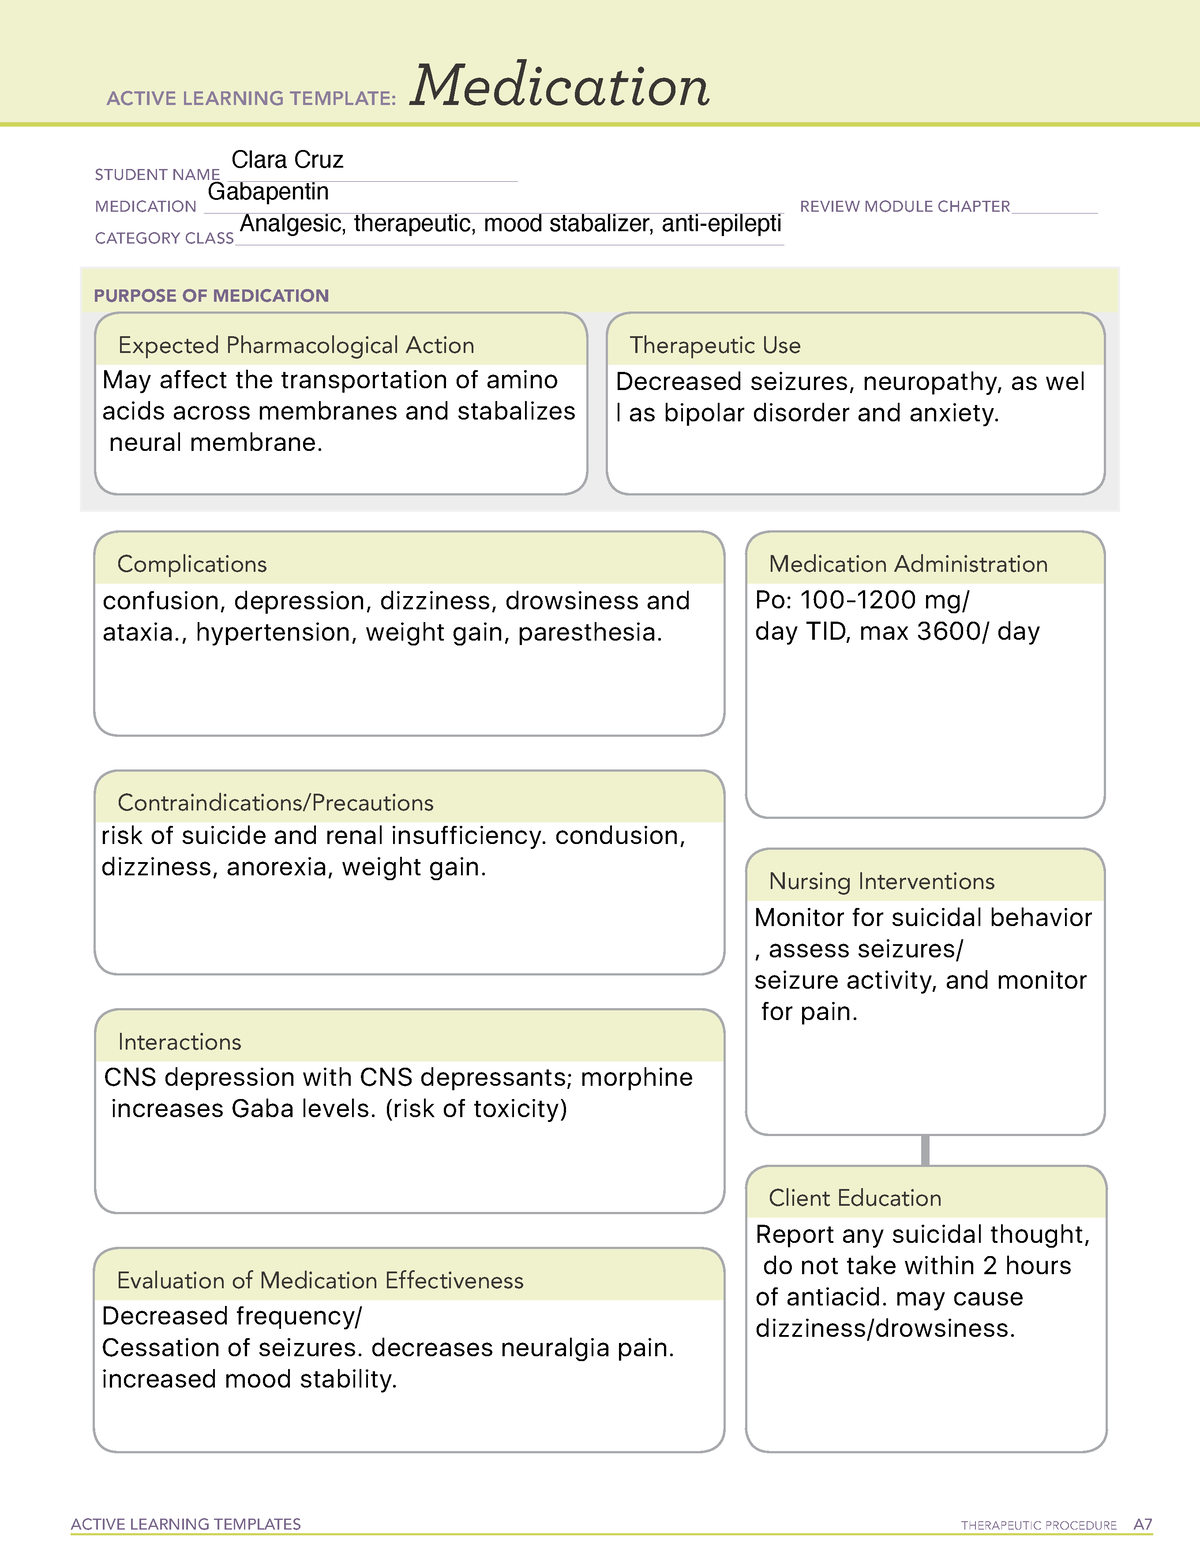 med-card-gabapentin-active-learning-templates-therapeutic-procedure-a